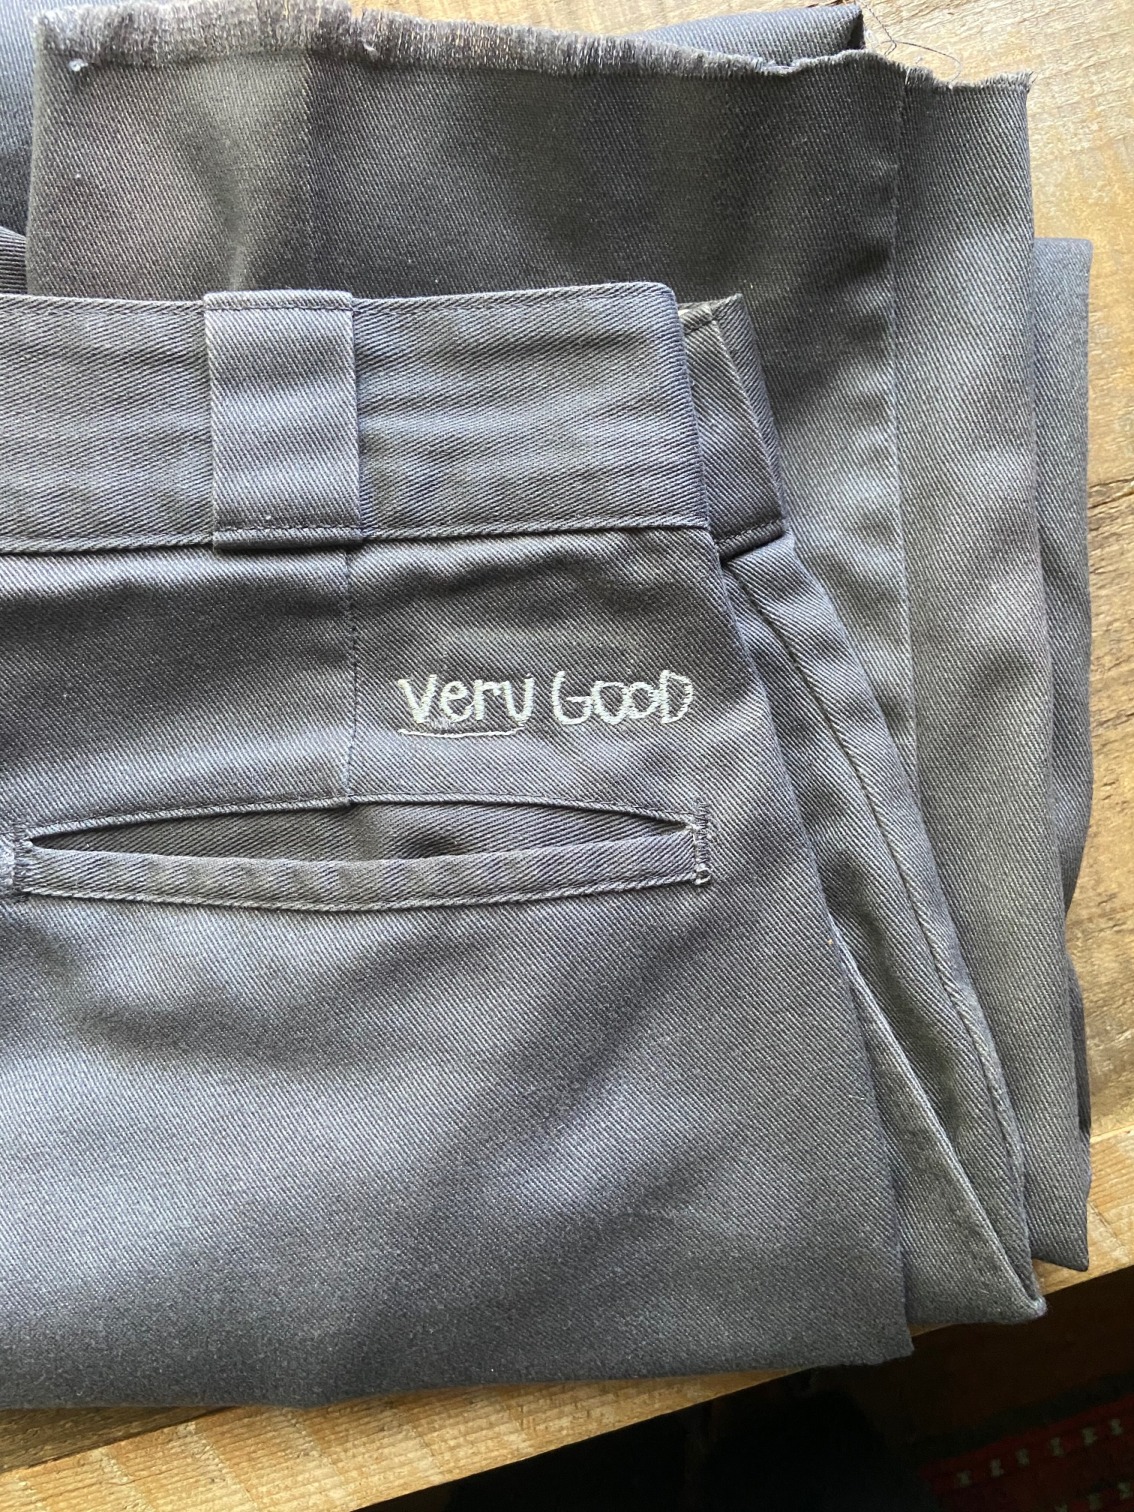 The phrase 'Very Good' embroidered on a pair of pants